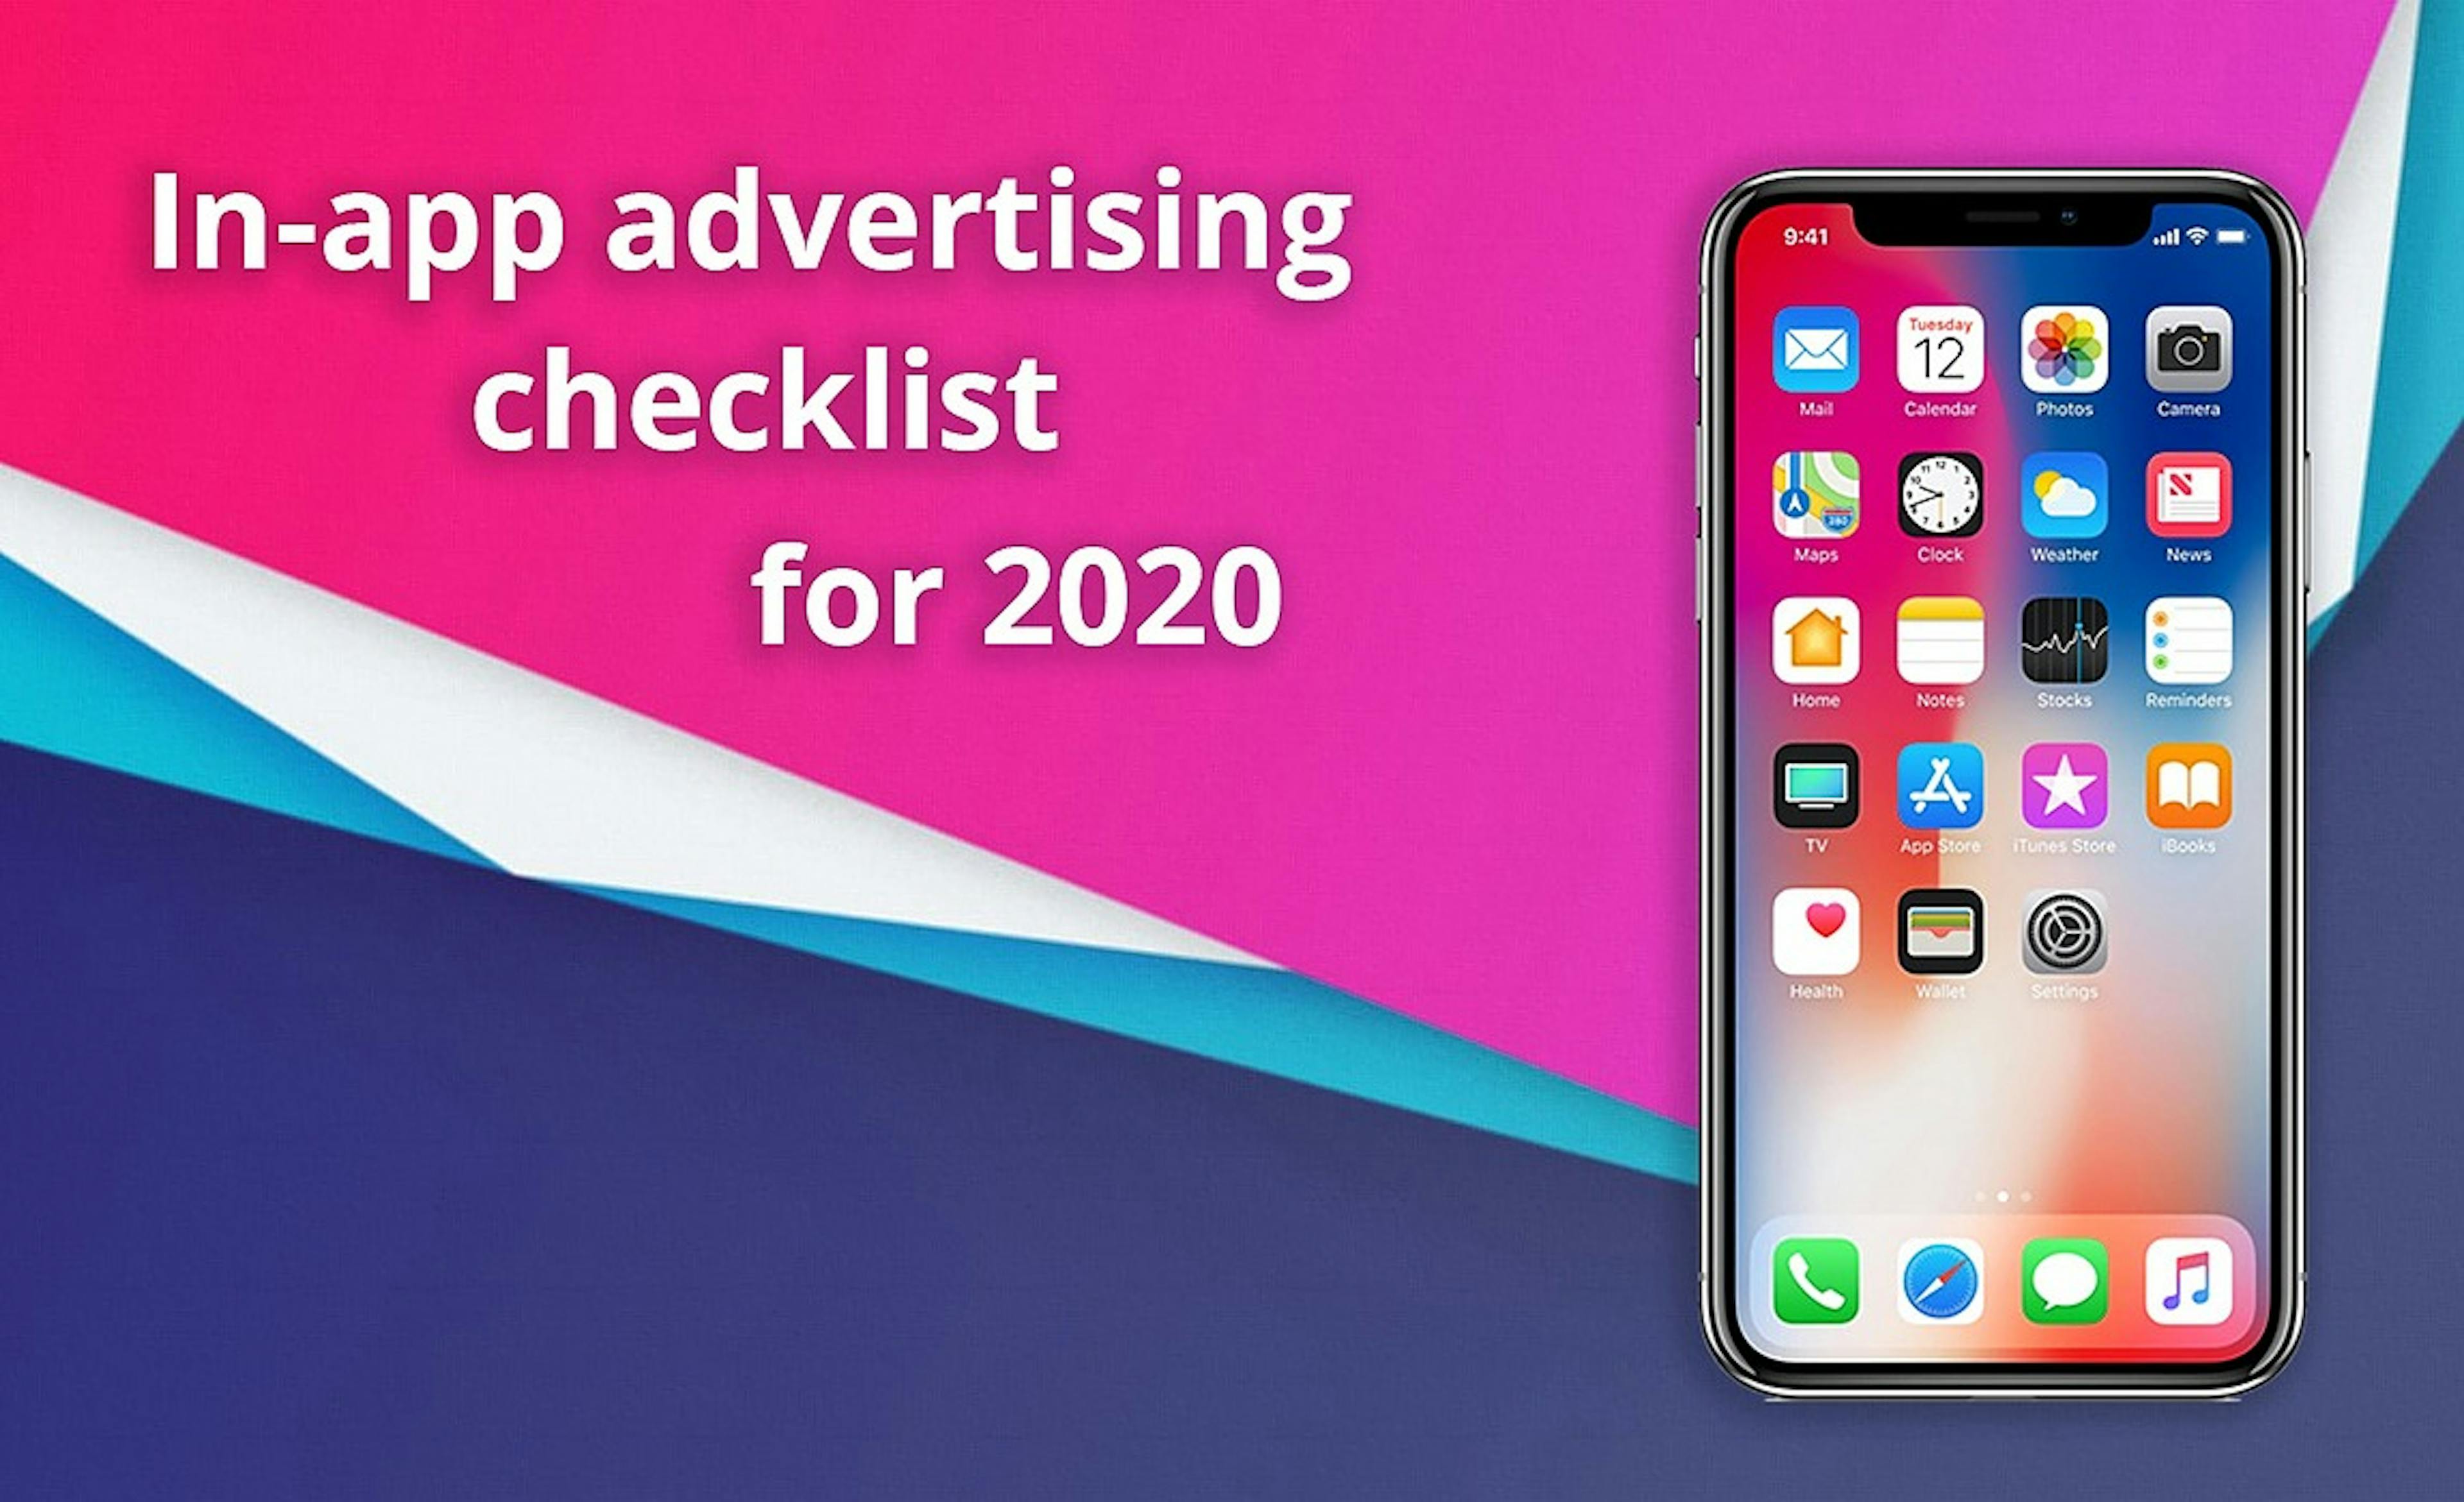 /in-app-advertising-checklist-2020-edition-xw7436vy feature image